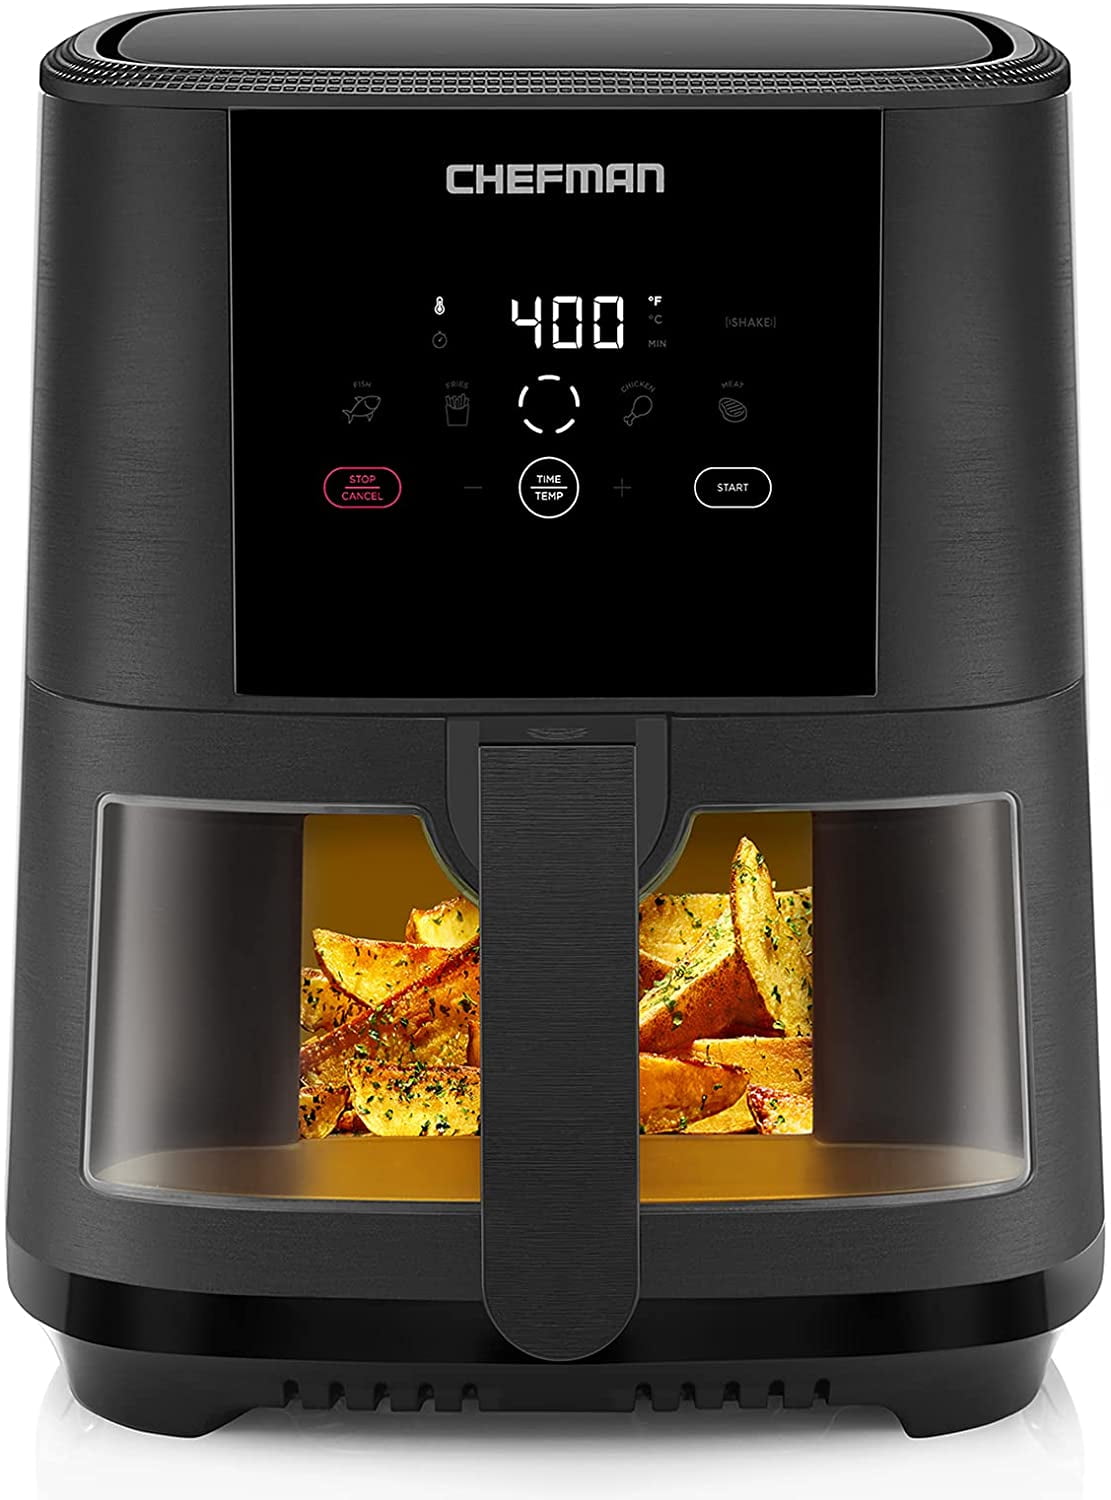 Chefman 5 Qt. Digital Air Fryer with Temperature Probe, 8 Customizable  Cooking Presets, Large Easy-View Window RJ38-SQPF-5T2P-W - The Home Depot